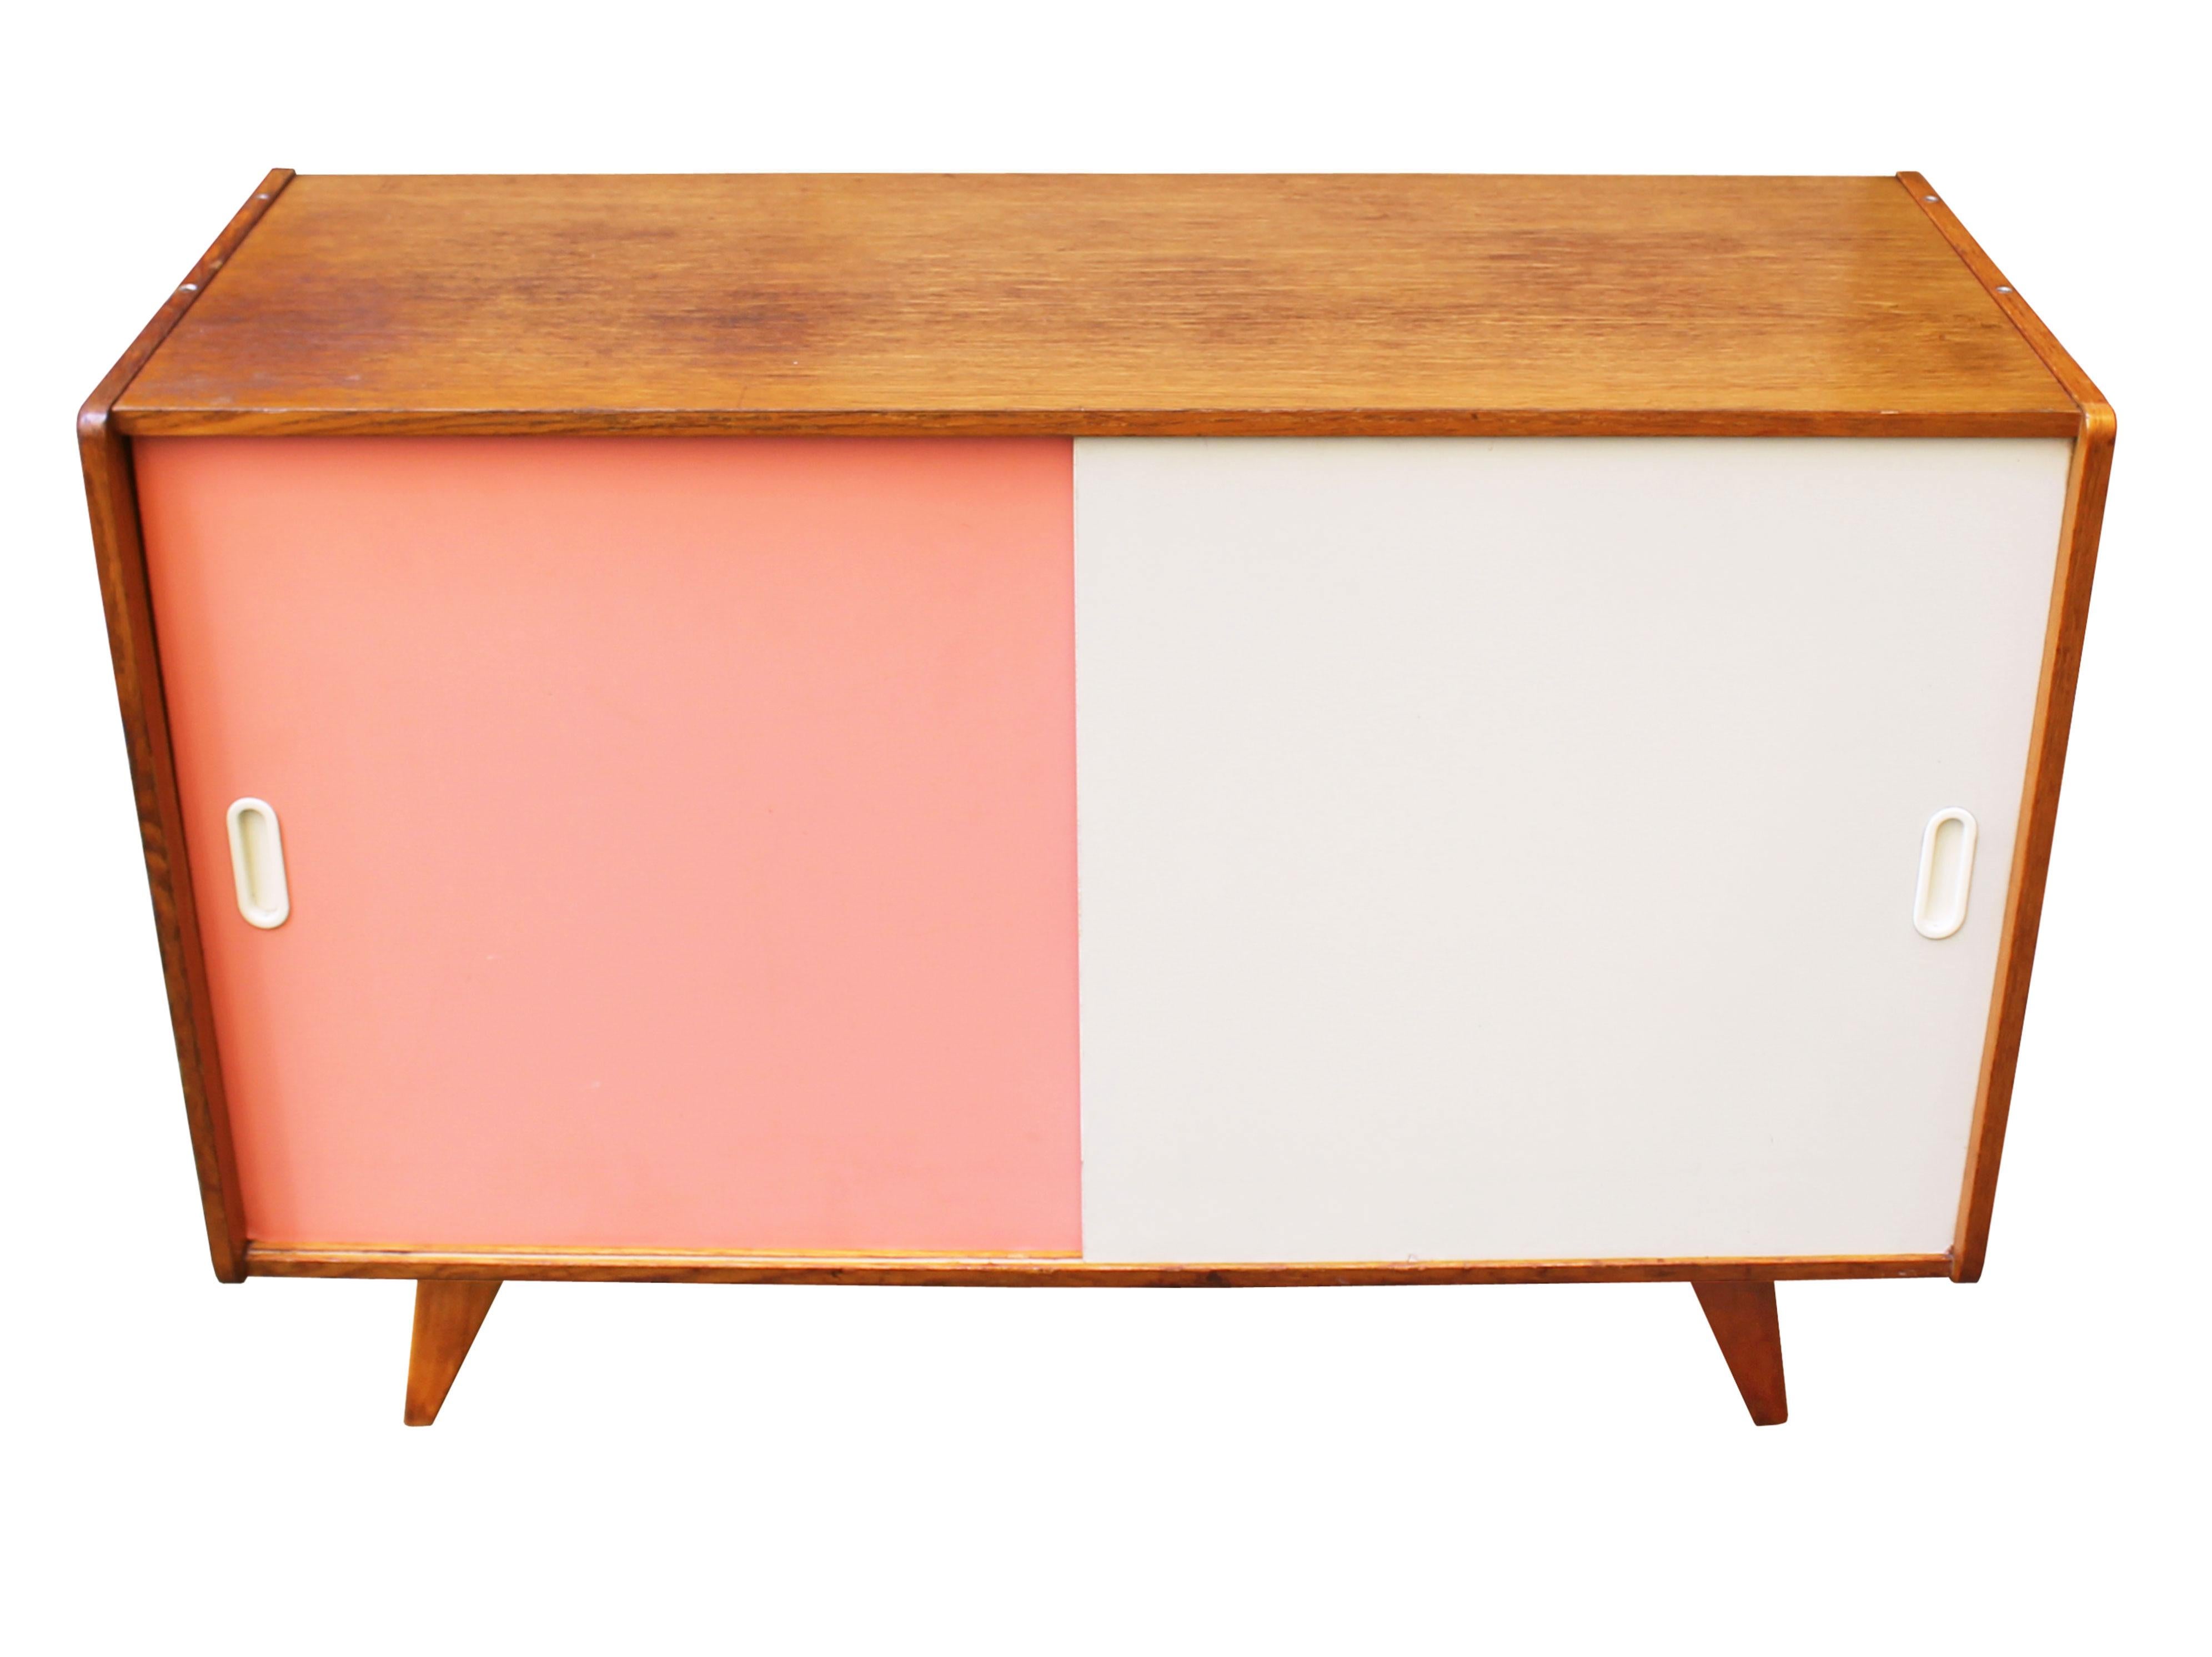 The U-452 Mid Century sideboard with pink and white sliding doors, was designed by the Czech furniture designer Jiri Jiroutek. It is part of the popular U collection manufactured by Interier Praha in the 1960s Czechoslovakia.

This piece perfectly